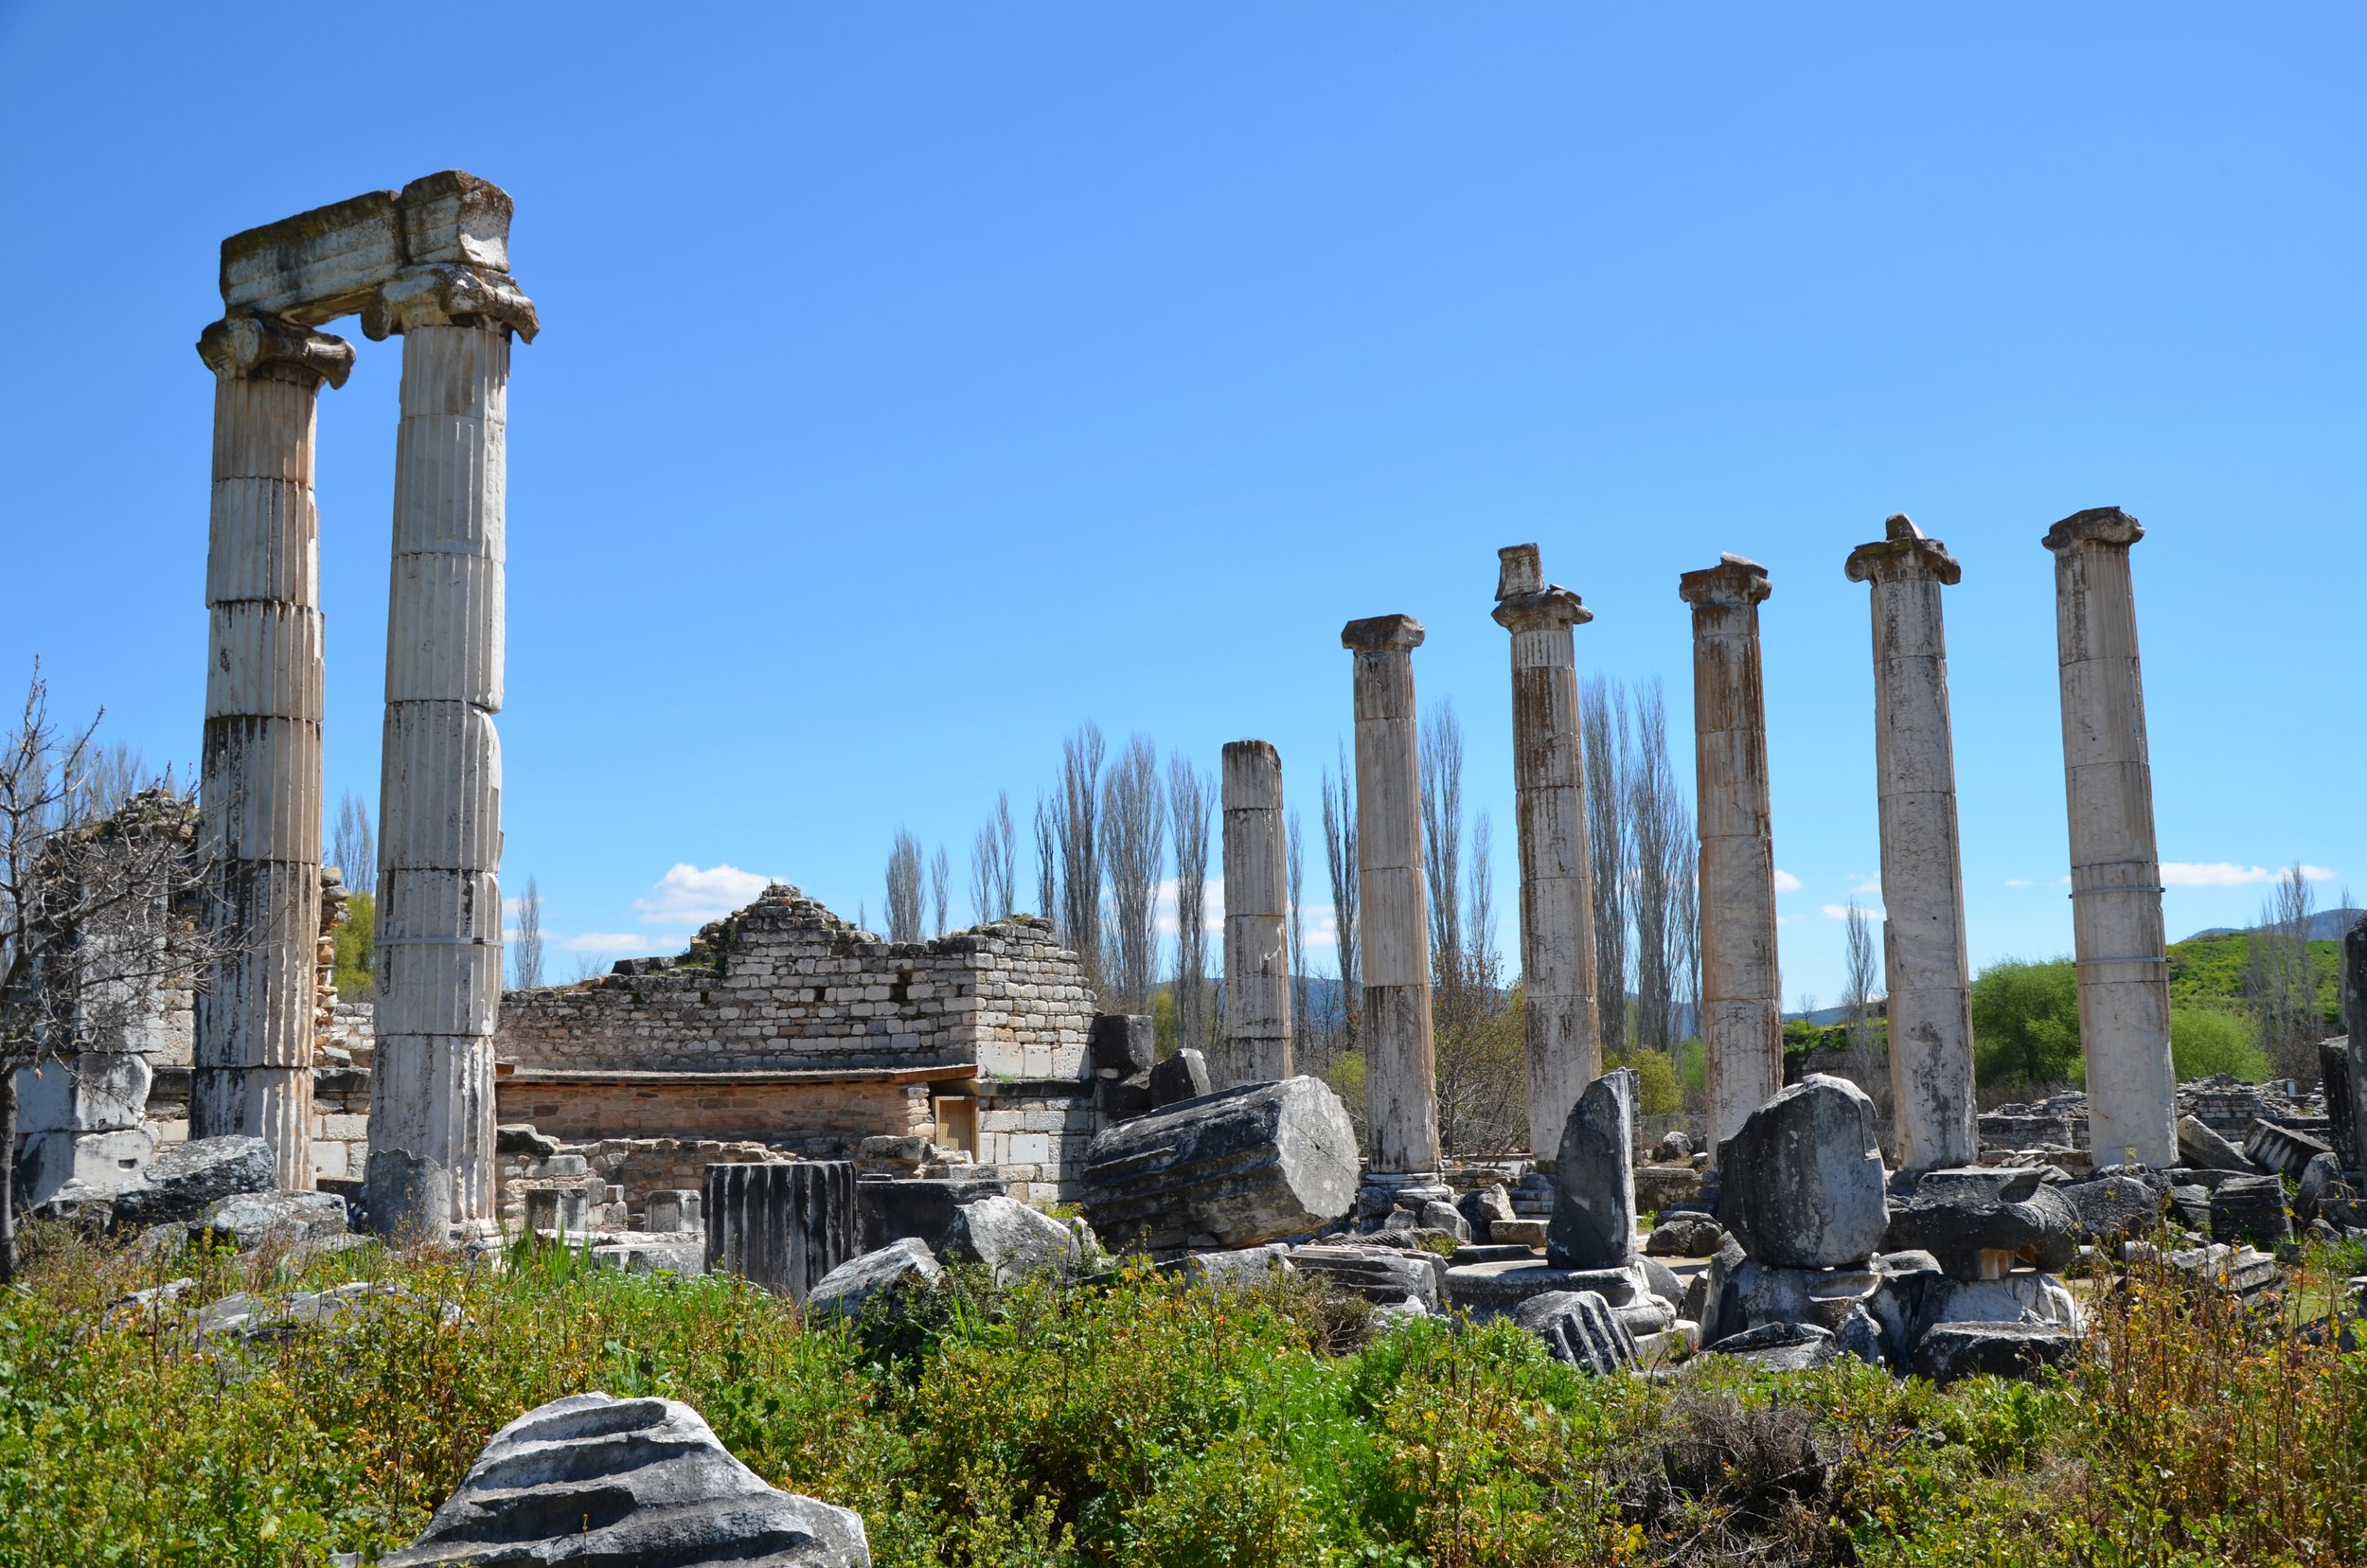 The_Temple_of_Aphrodite,_built_in_the_Ionic_order_in_stages_during_the_Roman_period_(from_1st_century_BC_to_2nd_century_AD)_and_later_converted_into_a_Christian_basilica,_Aphrodisias,_Caria,_Turkey_(20299497860).jpg